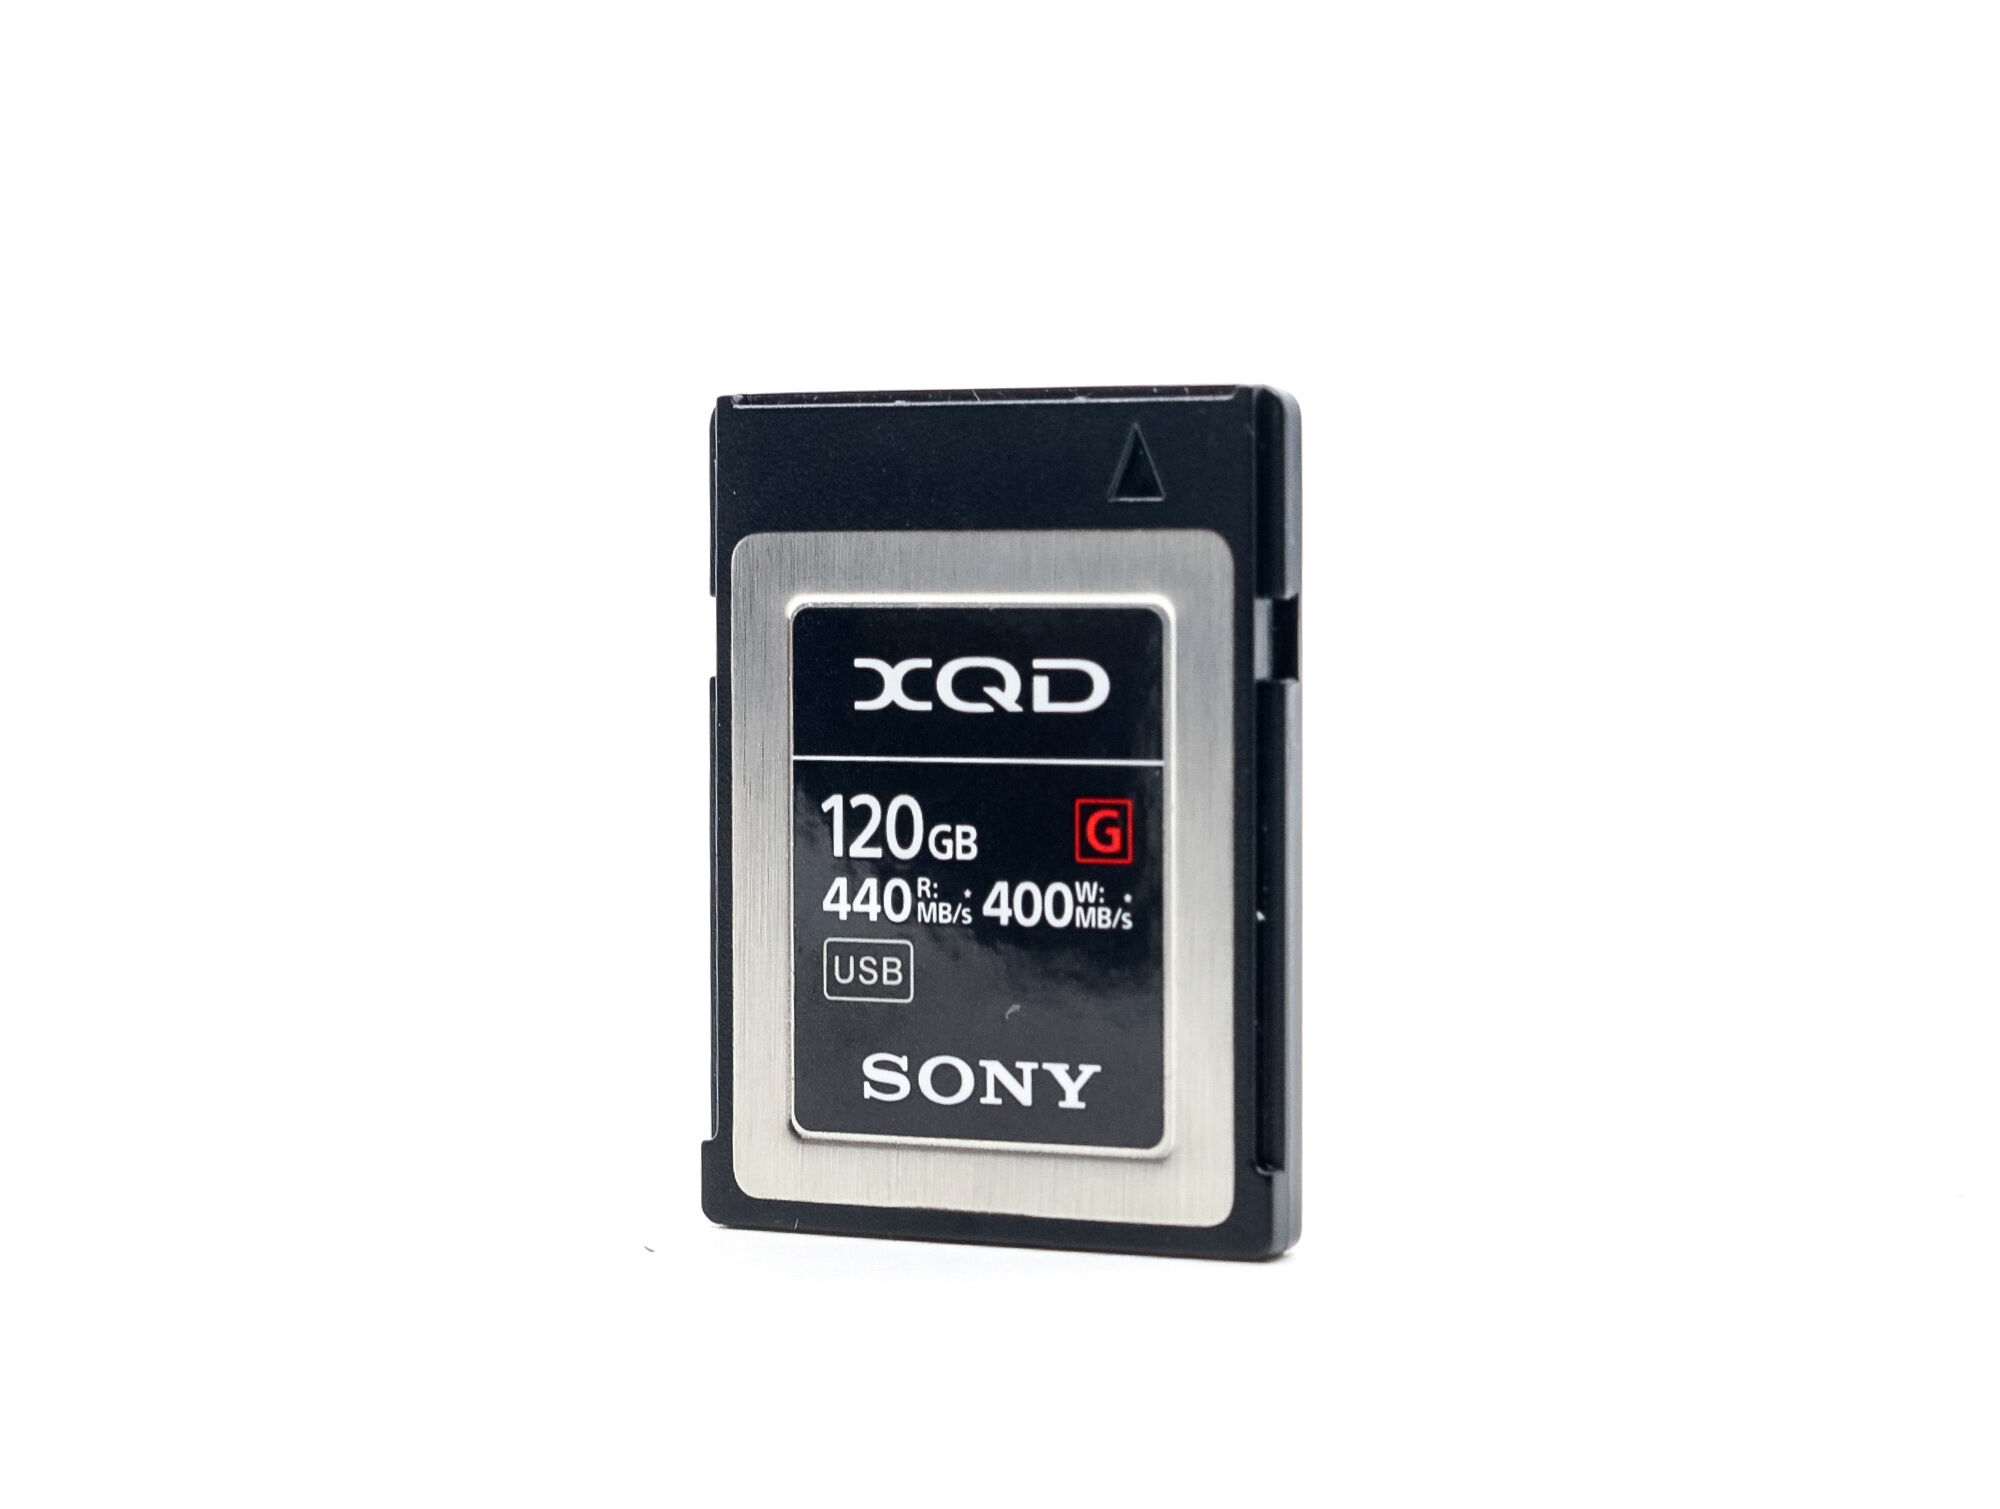 Sony XQD G 120GB 440MB/s Card (Condition: Like New)